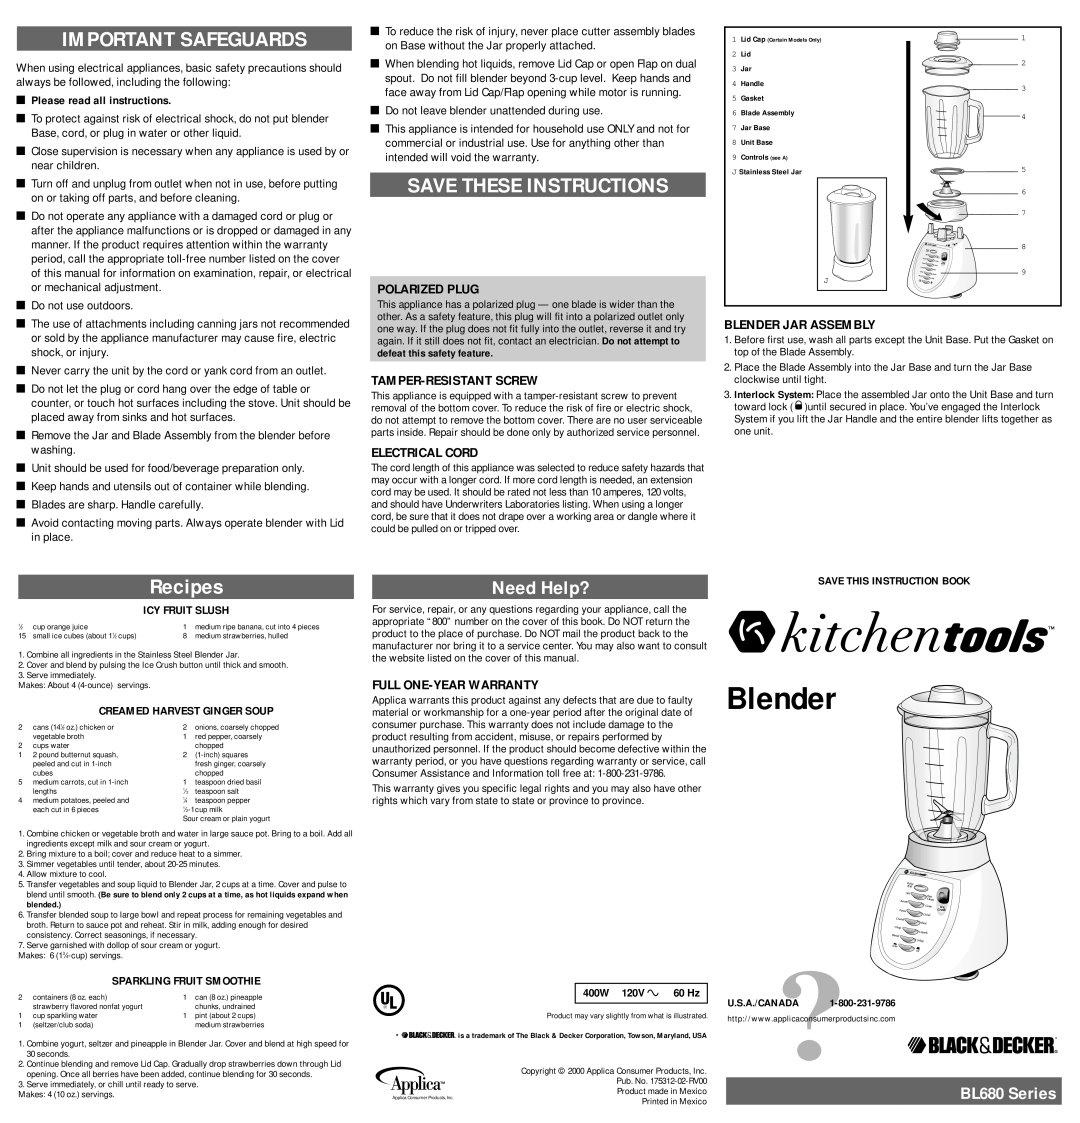 Black & Decker warranty Important Safeguards, Recipes, Save These Instructions, BL680 Series, Polarized Plug, 400W 